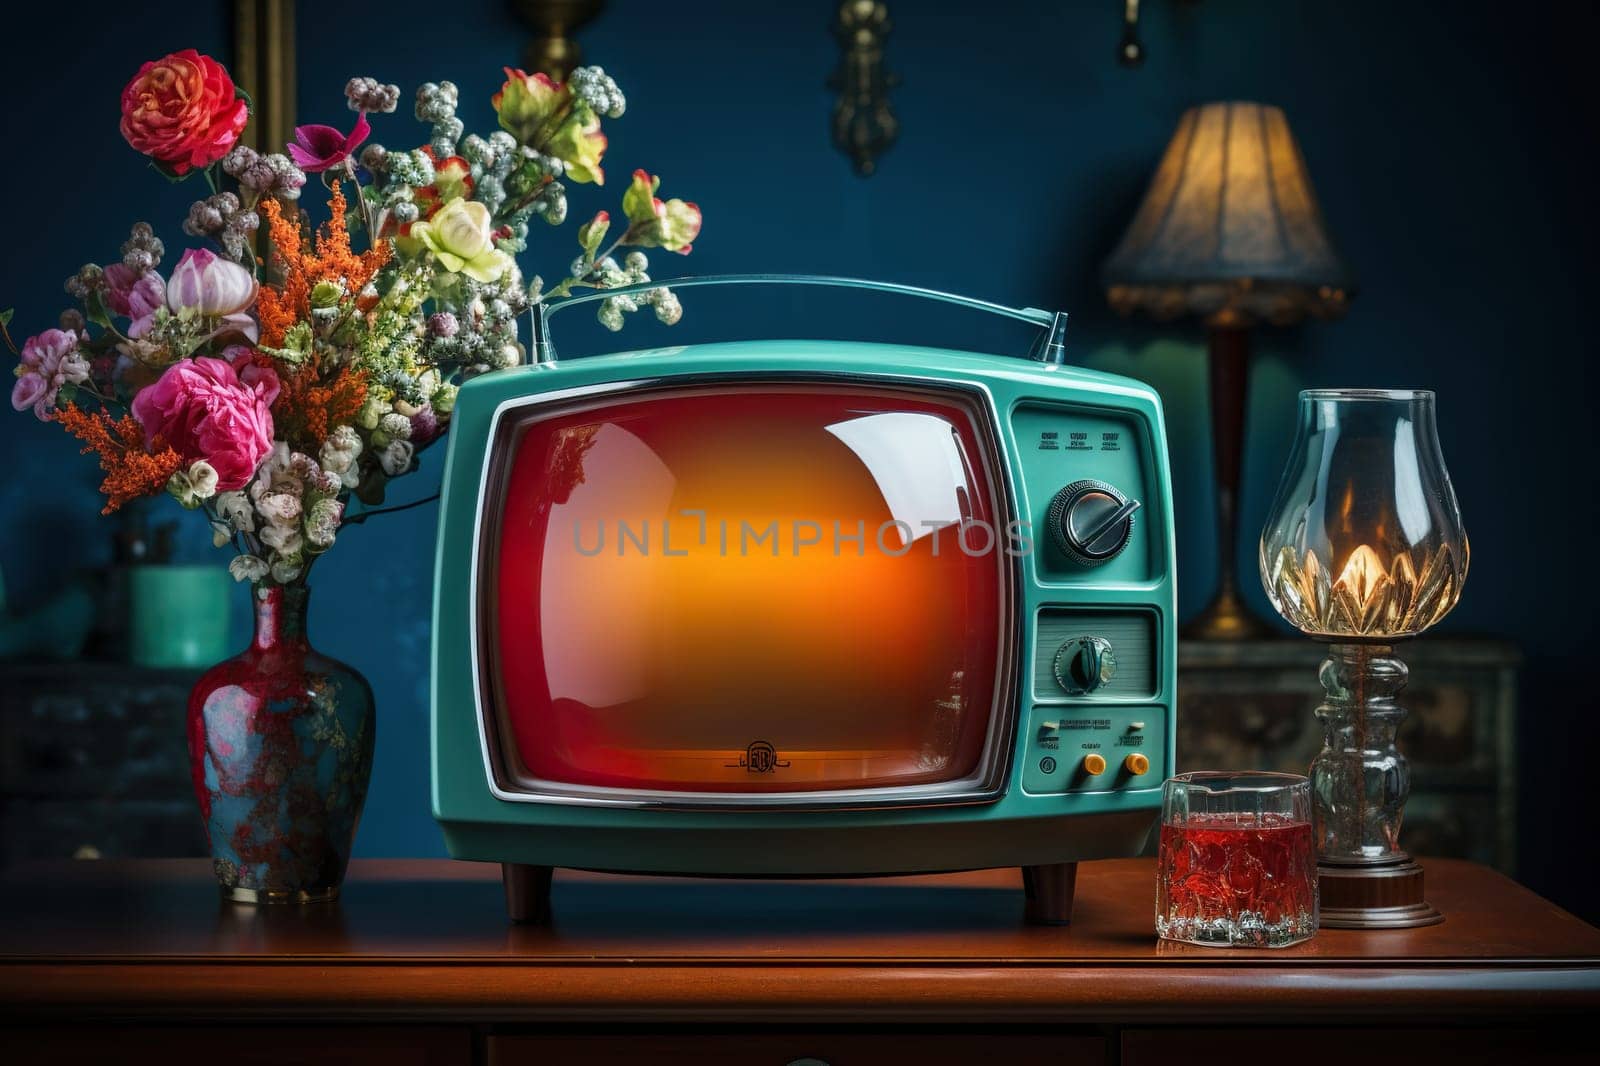 A vintage TV sits on the table next to a bouquet of flowers in a vase.